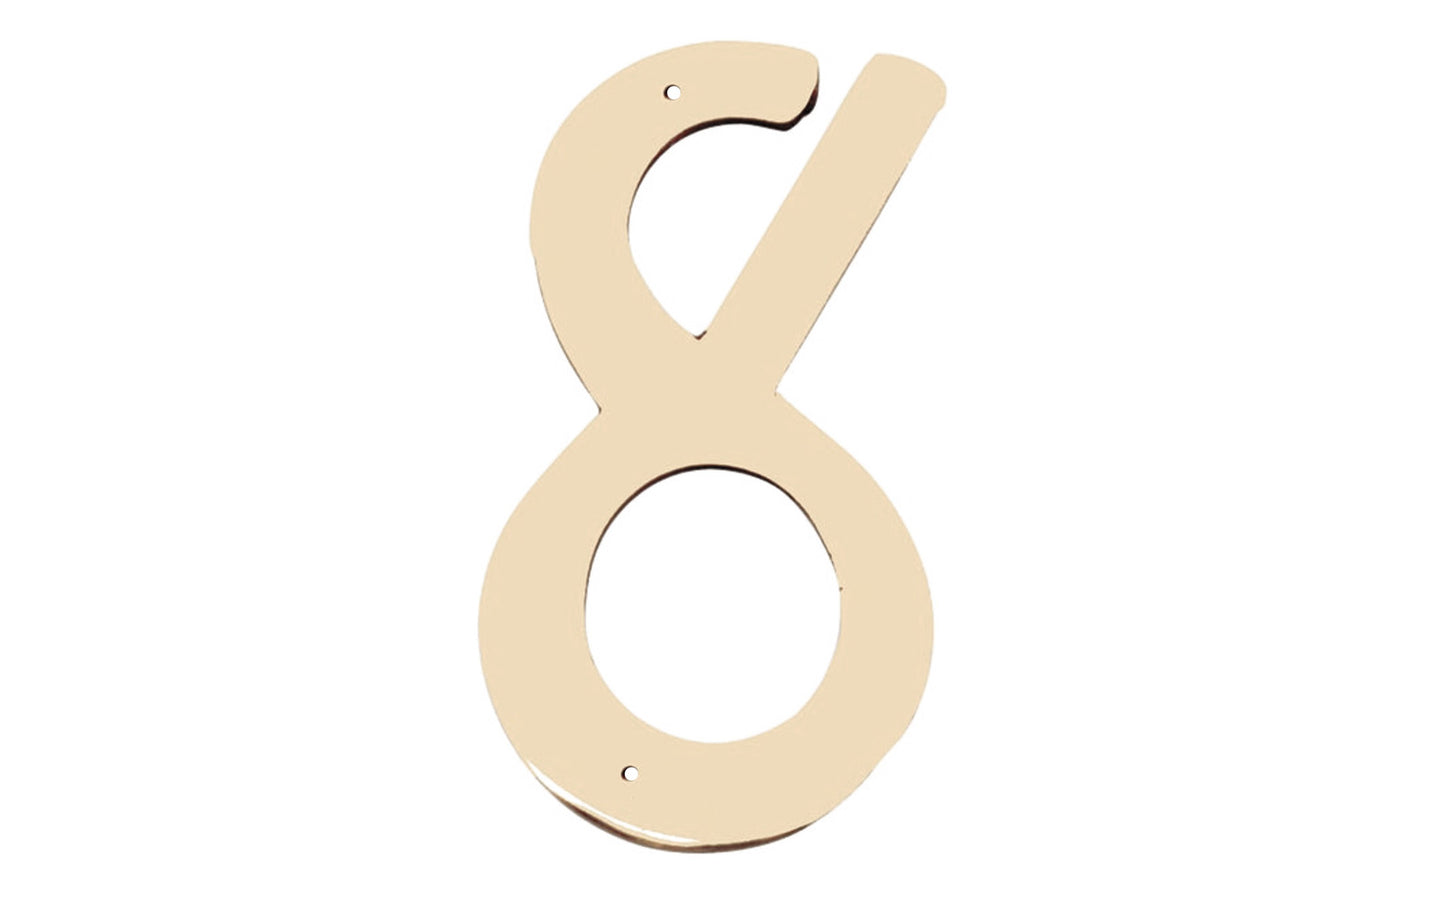 Number Eight Solid Brass House Number in a 4" size. Made of solid brass material - 1/16" thickness. Lacquered brass finish. Mounting nails included. #8 House Number. Hy-Ko Model No. BR-40/8. 029069200985